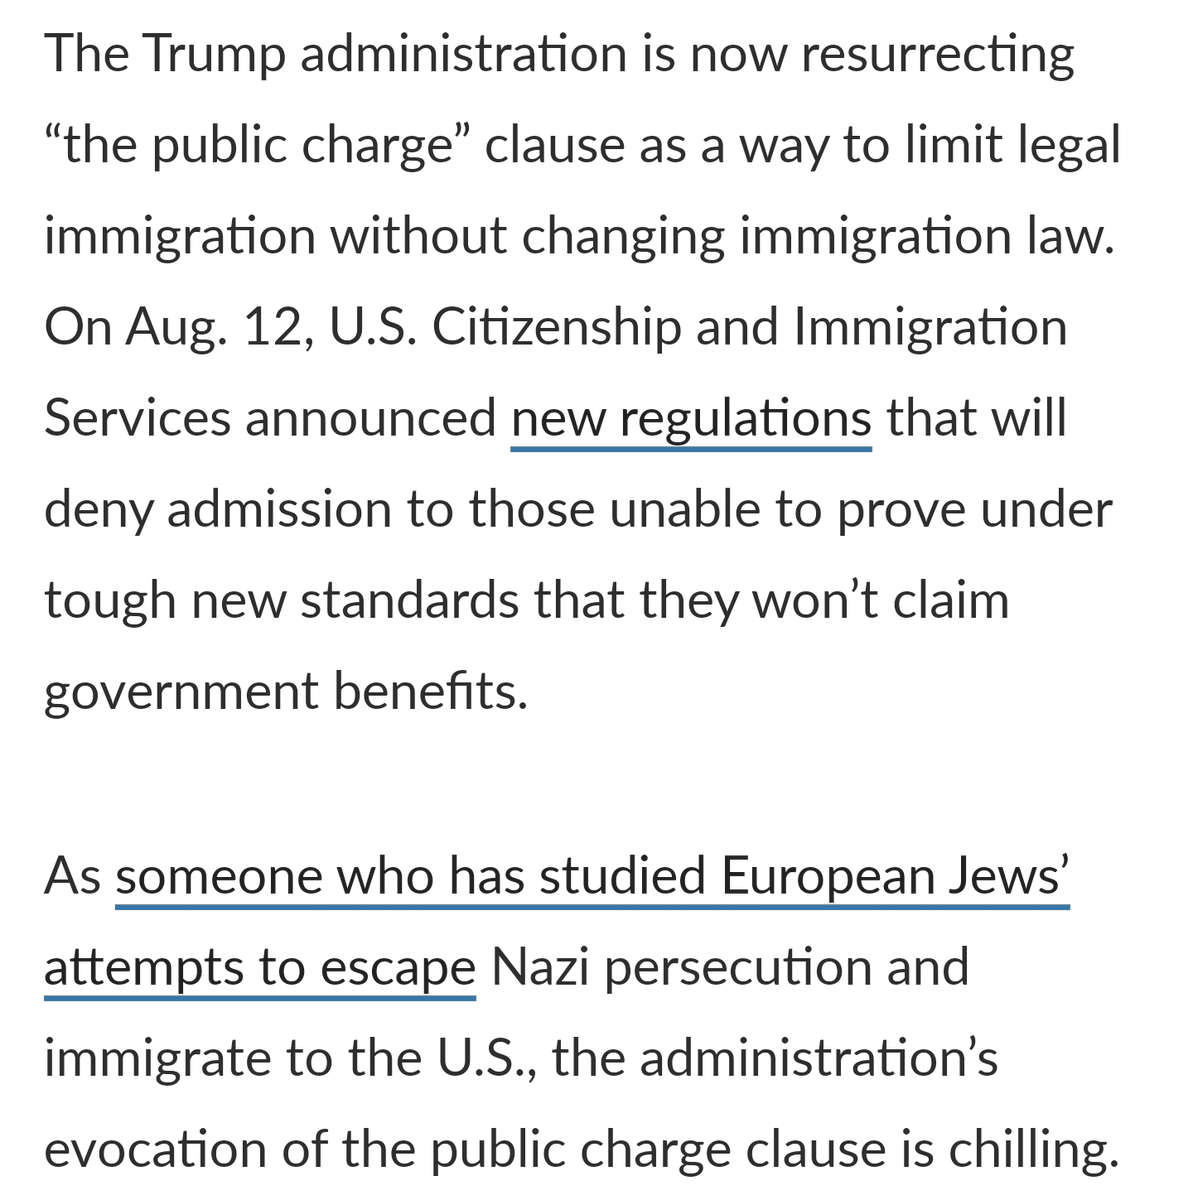  https://www.marketwatch.com/story/trump-is-using-the-same-immigration-policy-that-once-kept-out-jews-fleeing-nazi-germany-2019-08-20 (2019) on trump immigration. https://www.washingtonpost.com/politics/trump-attacks-protections-for-immigrants-from-shithole-countries-in-oval-office-meeting/2018/01/11/bfc0725c-f711-11e7-91af-31ac729add94_story.html (2018)Excerpt from Article 1.